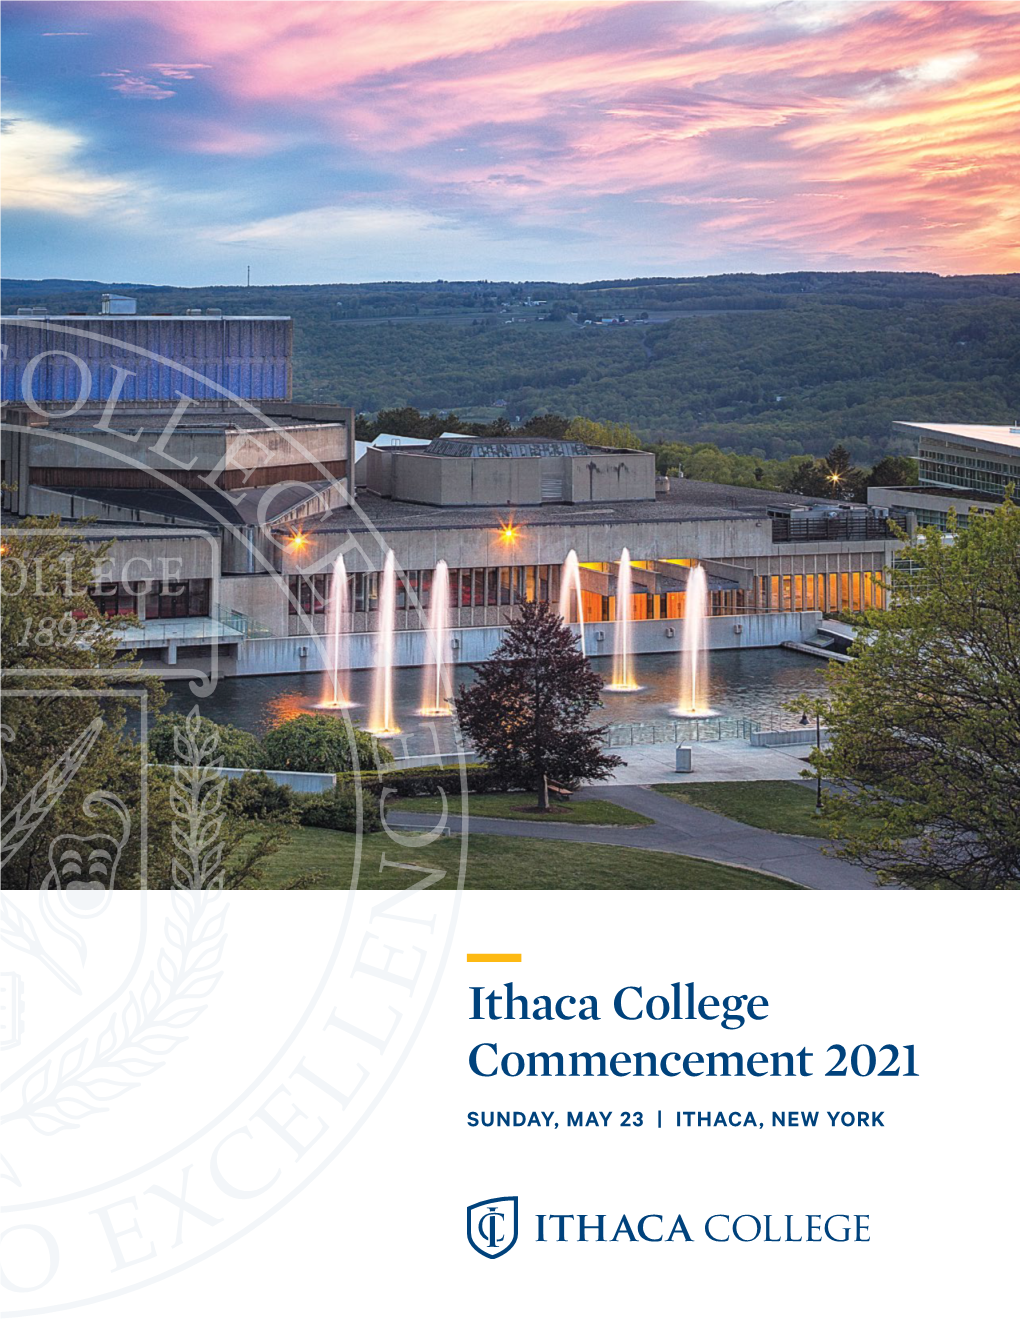 Ithaca College Commencement 2021 SUNDAY, MAY 23 | ITHACA, NEW YORK Greetings and Commencement Addresses